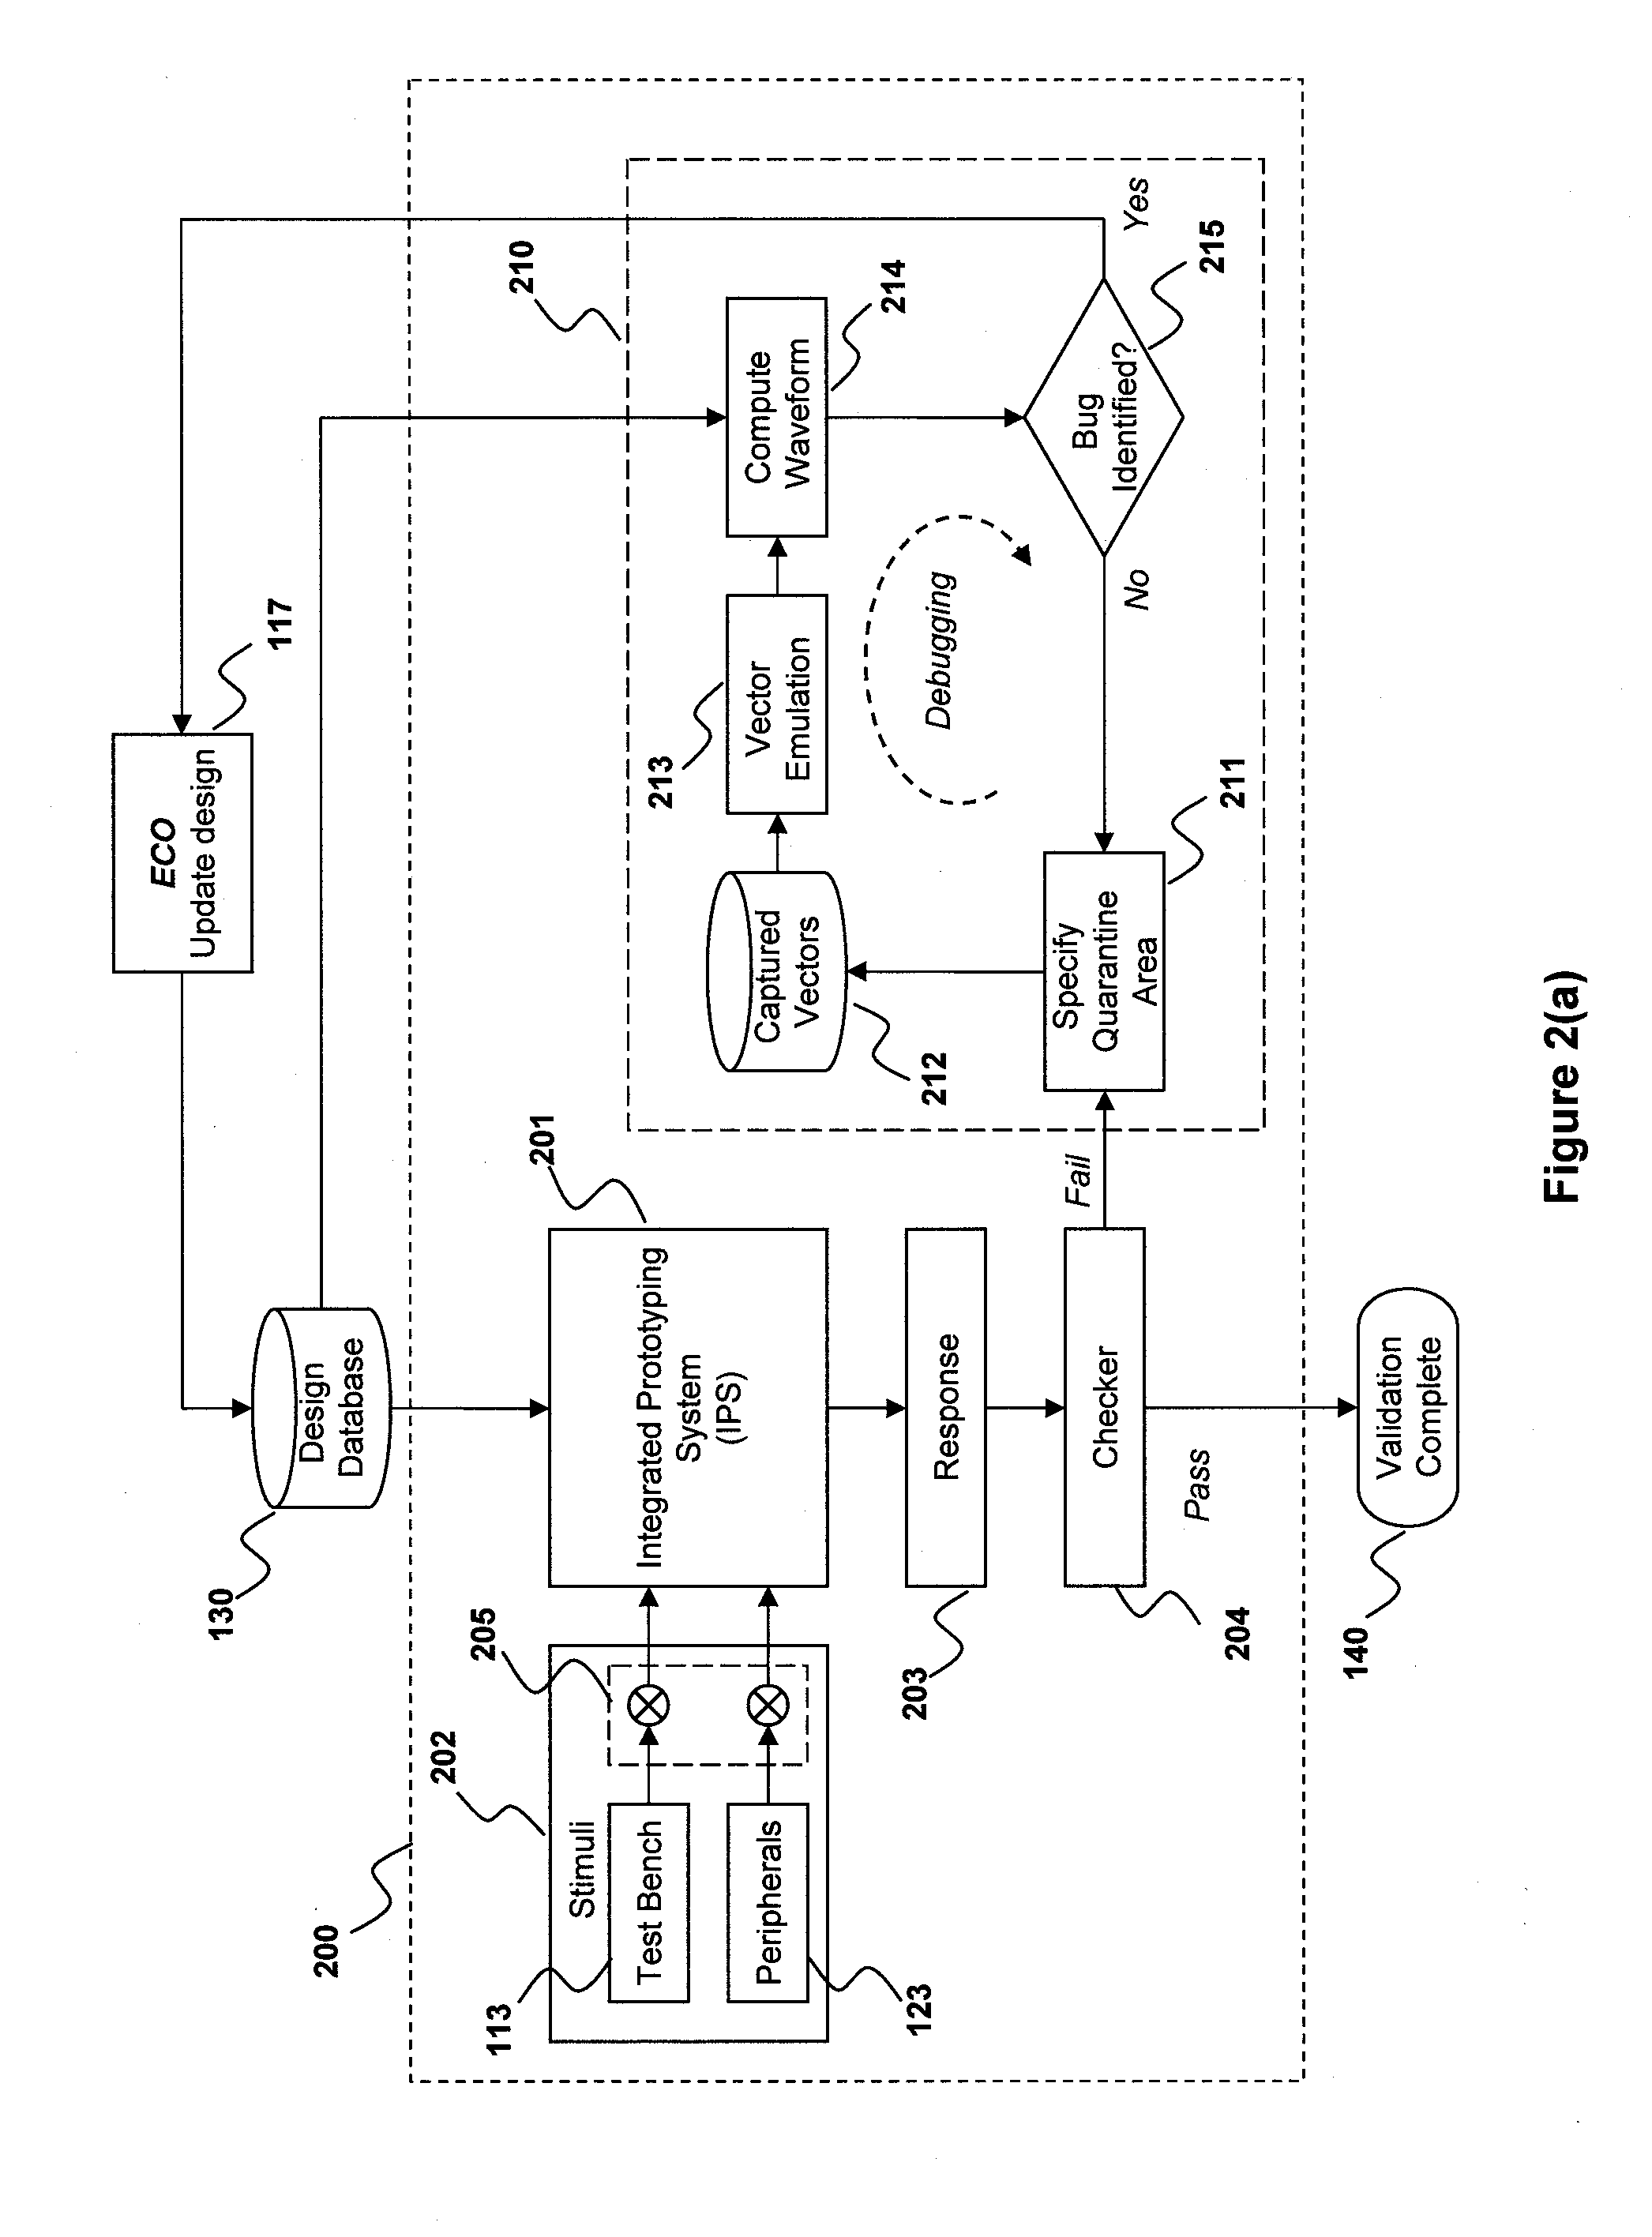 Method and apparatus for debugging an electronic system design (ESD) prototype